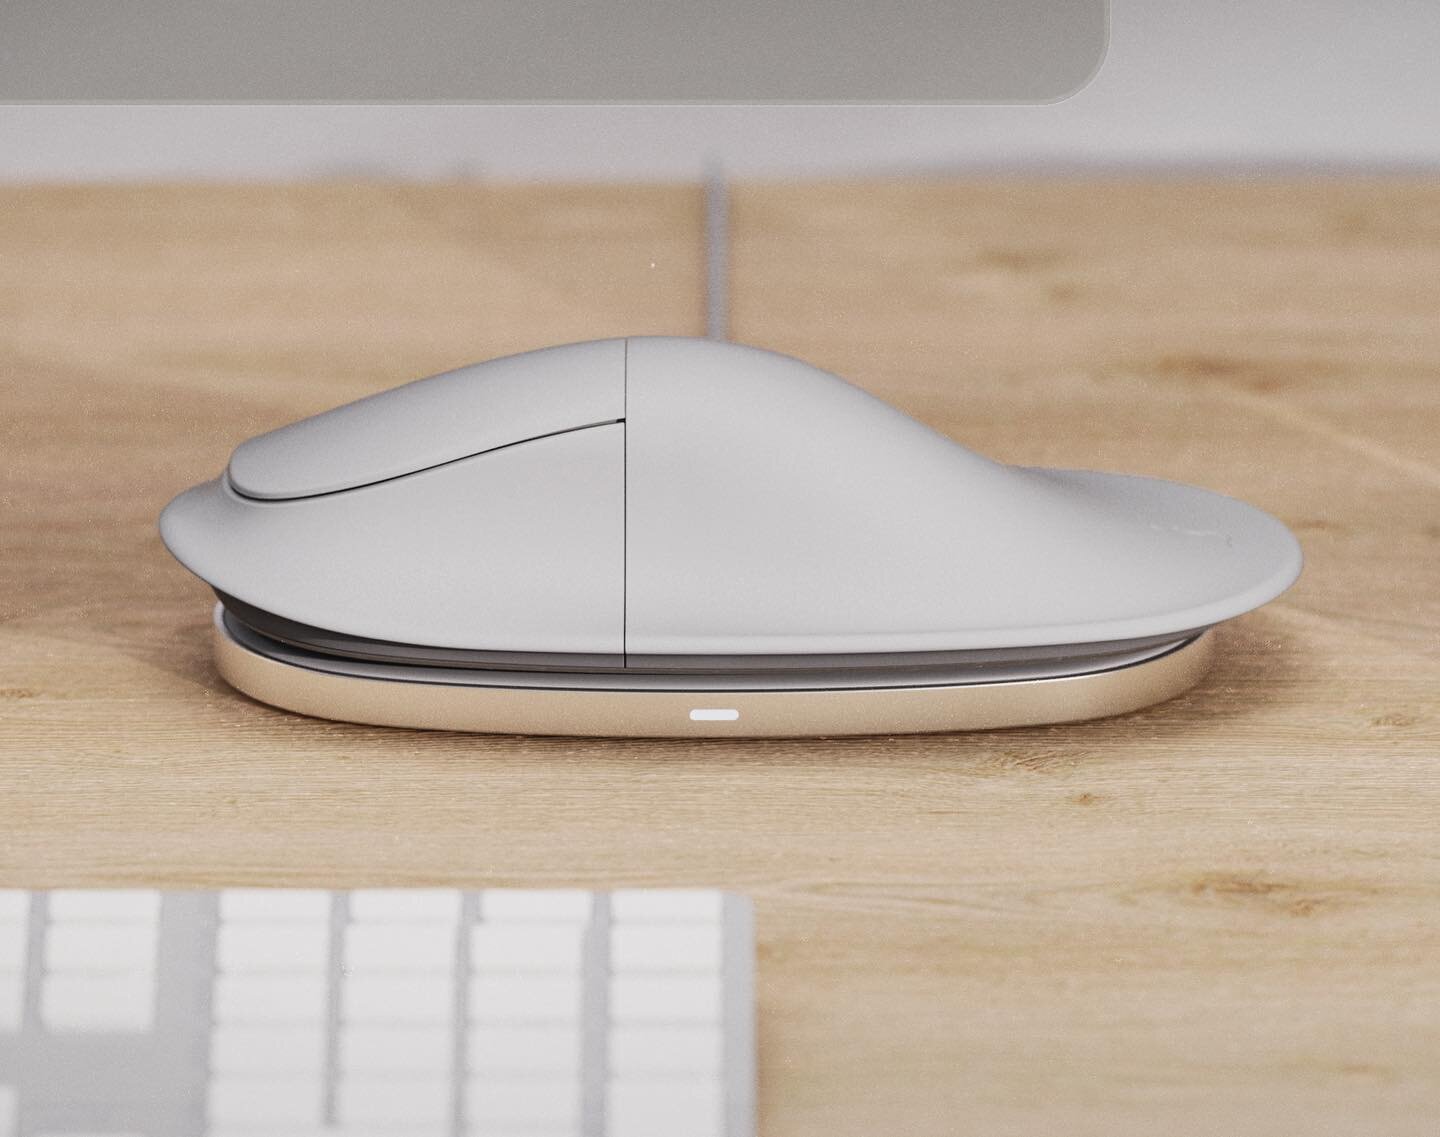 Ran a handful of in context renderings to showcase how the mouse would look and feel in the apple ecosystem.

Notice that the mouse&rsquo;s wireless charger also charges your iPhone while you&rsquo;re working throughout the day. 

More to come!